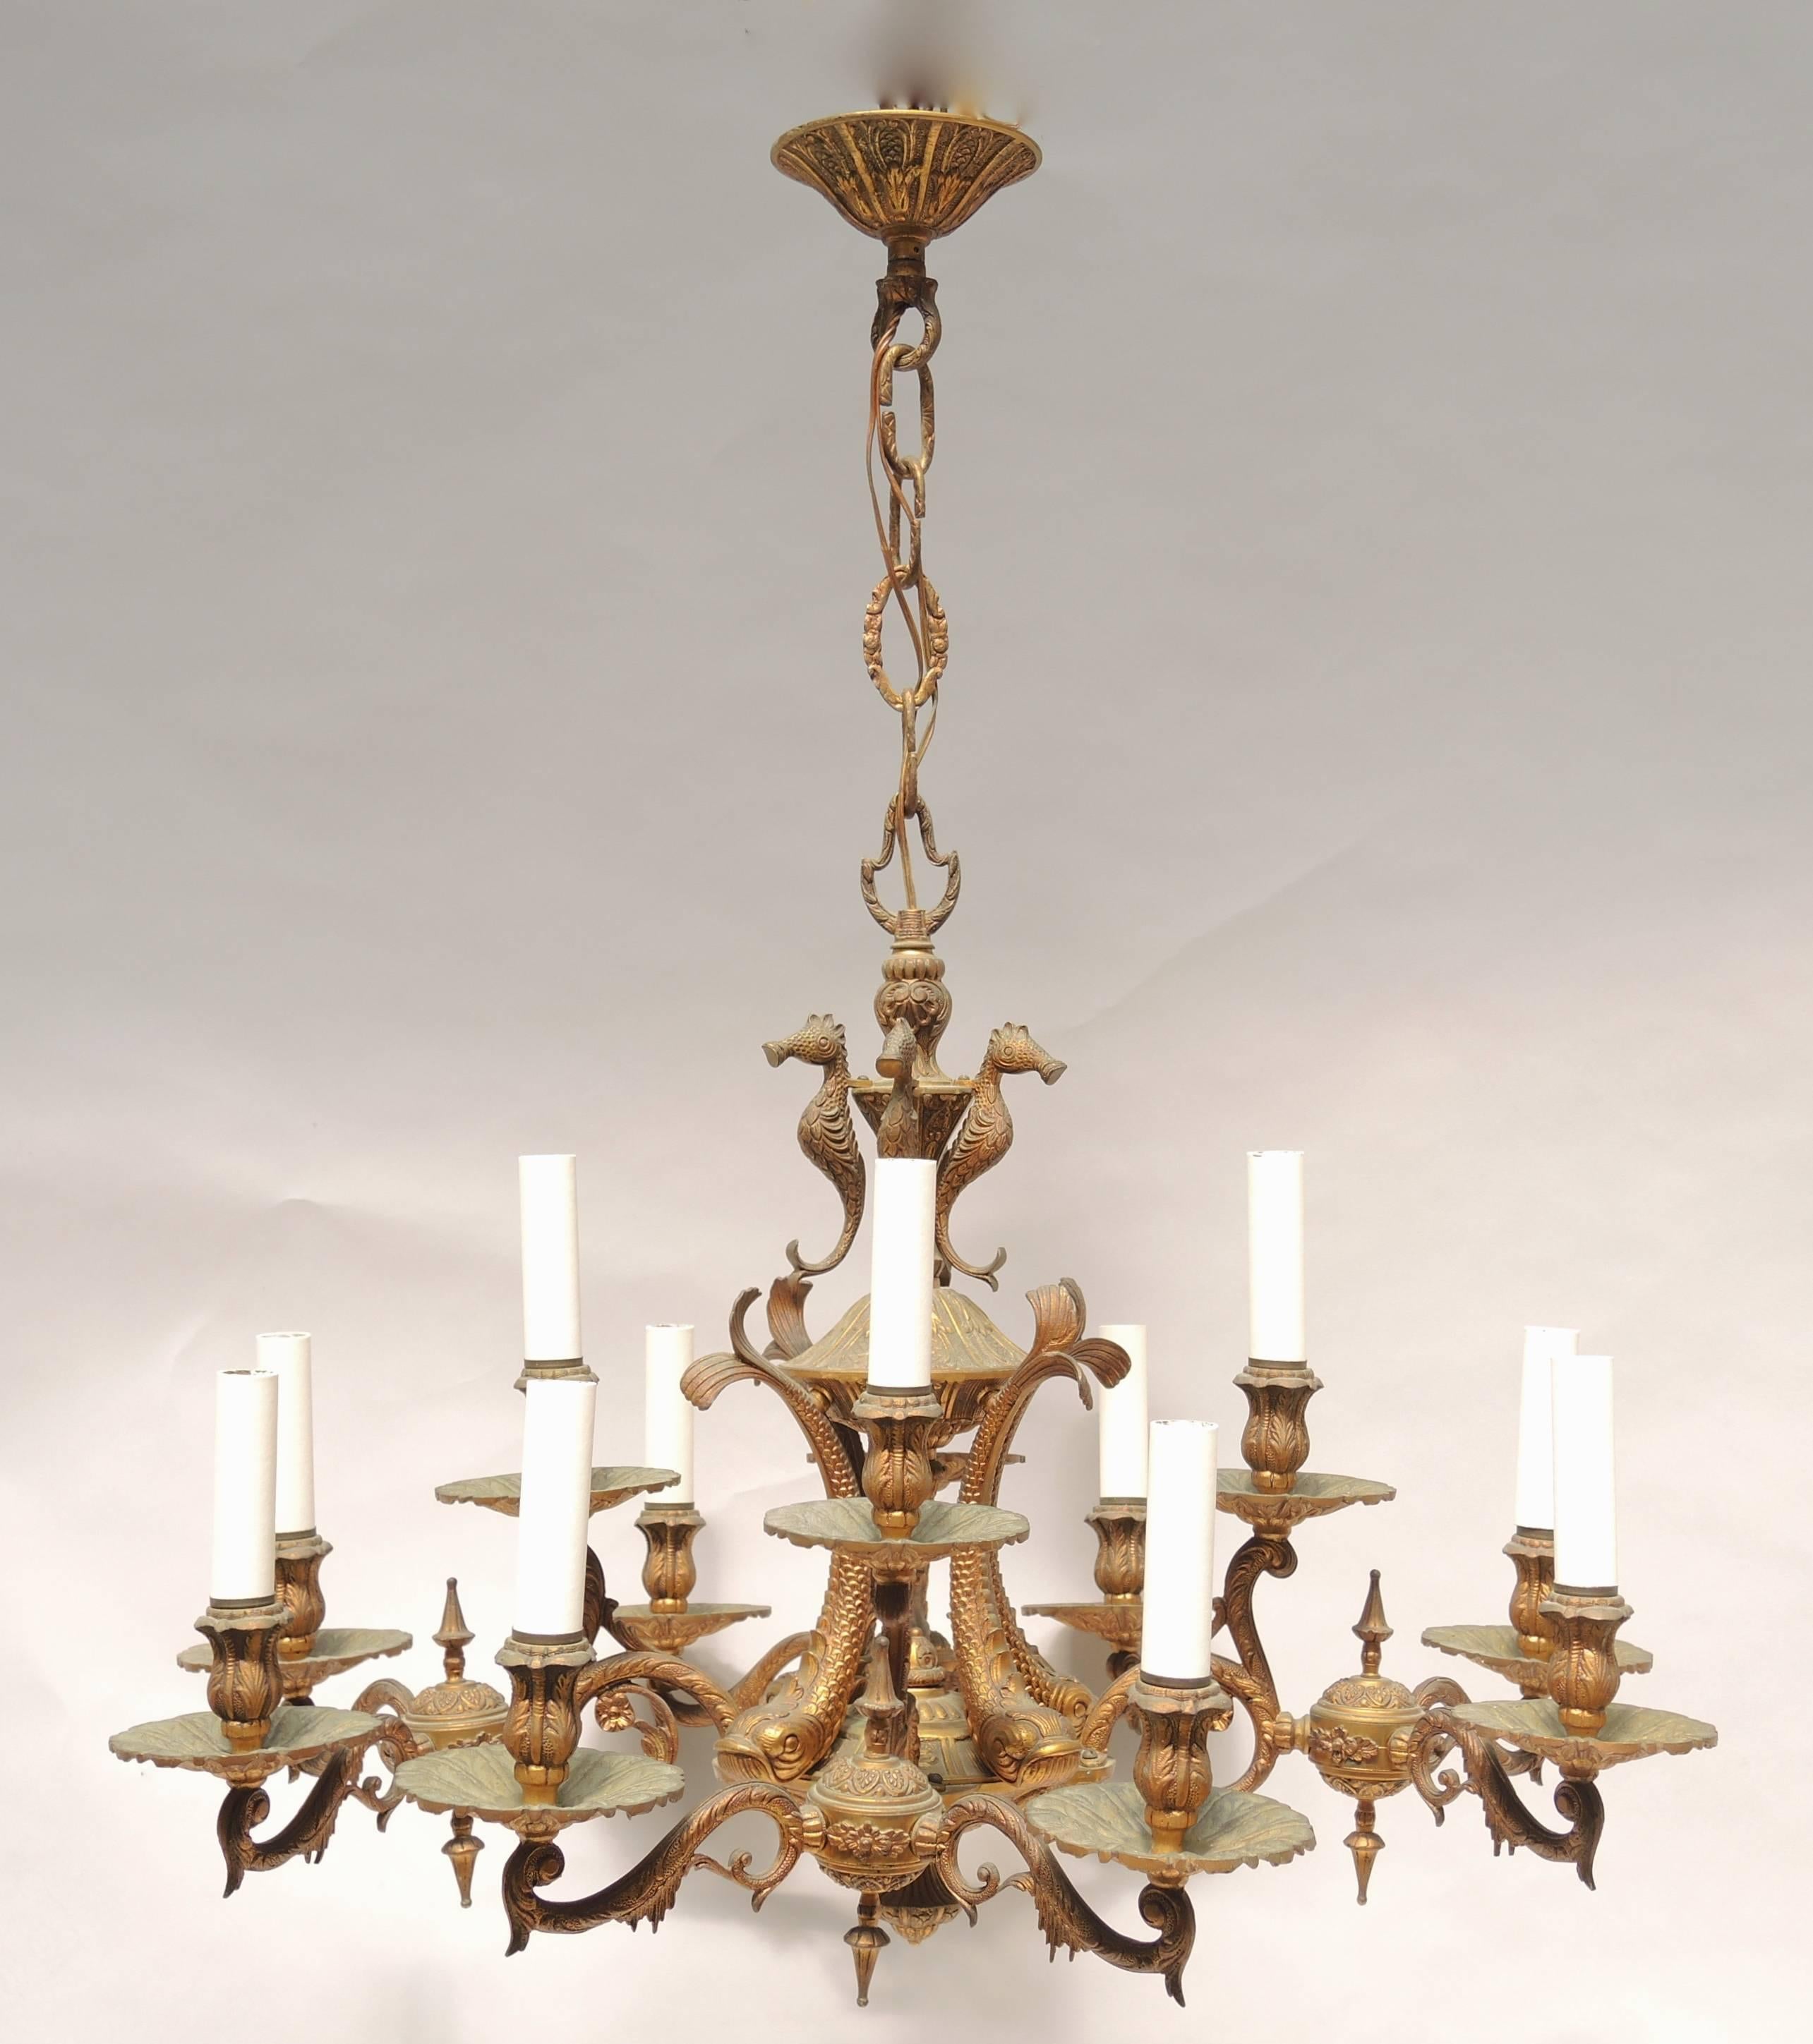 Unusual circa 1930 French cast bronze twelve-arm grotto theme chandelier.
Fine detailed castings of dolphins and seahorses decorate the central column while the twelve arms are cast to mimic the stalactites found hanging from grotto ceilings. A